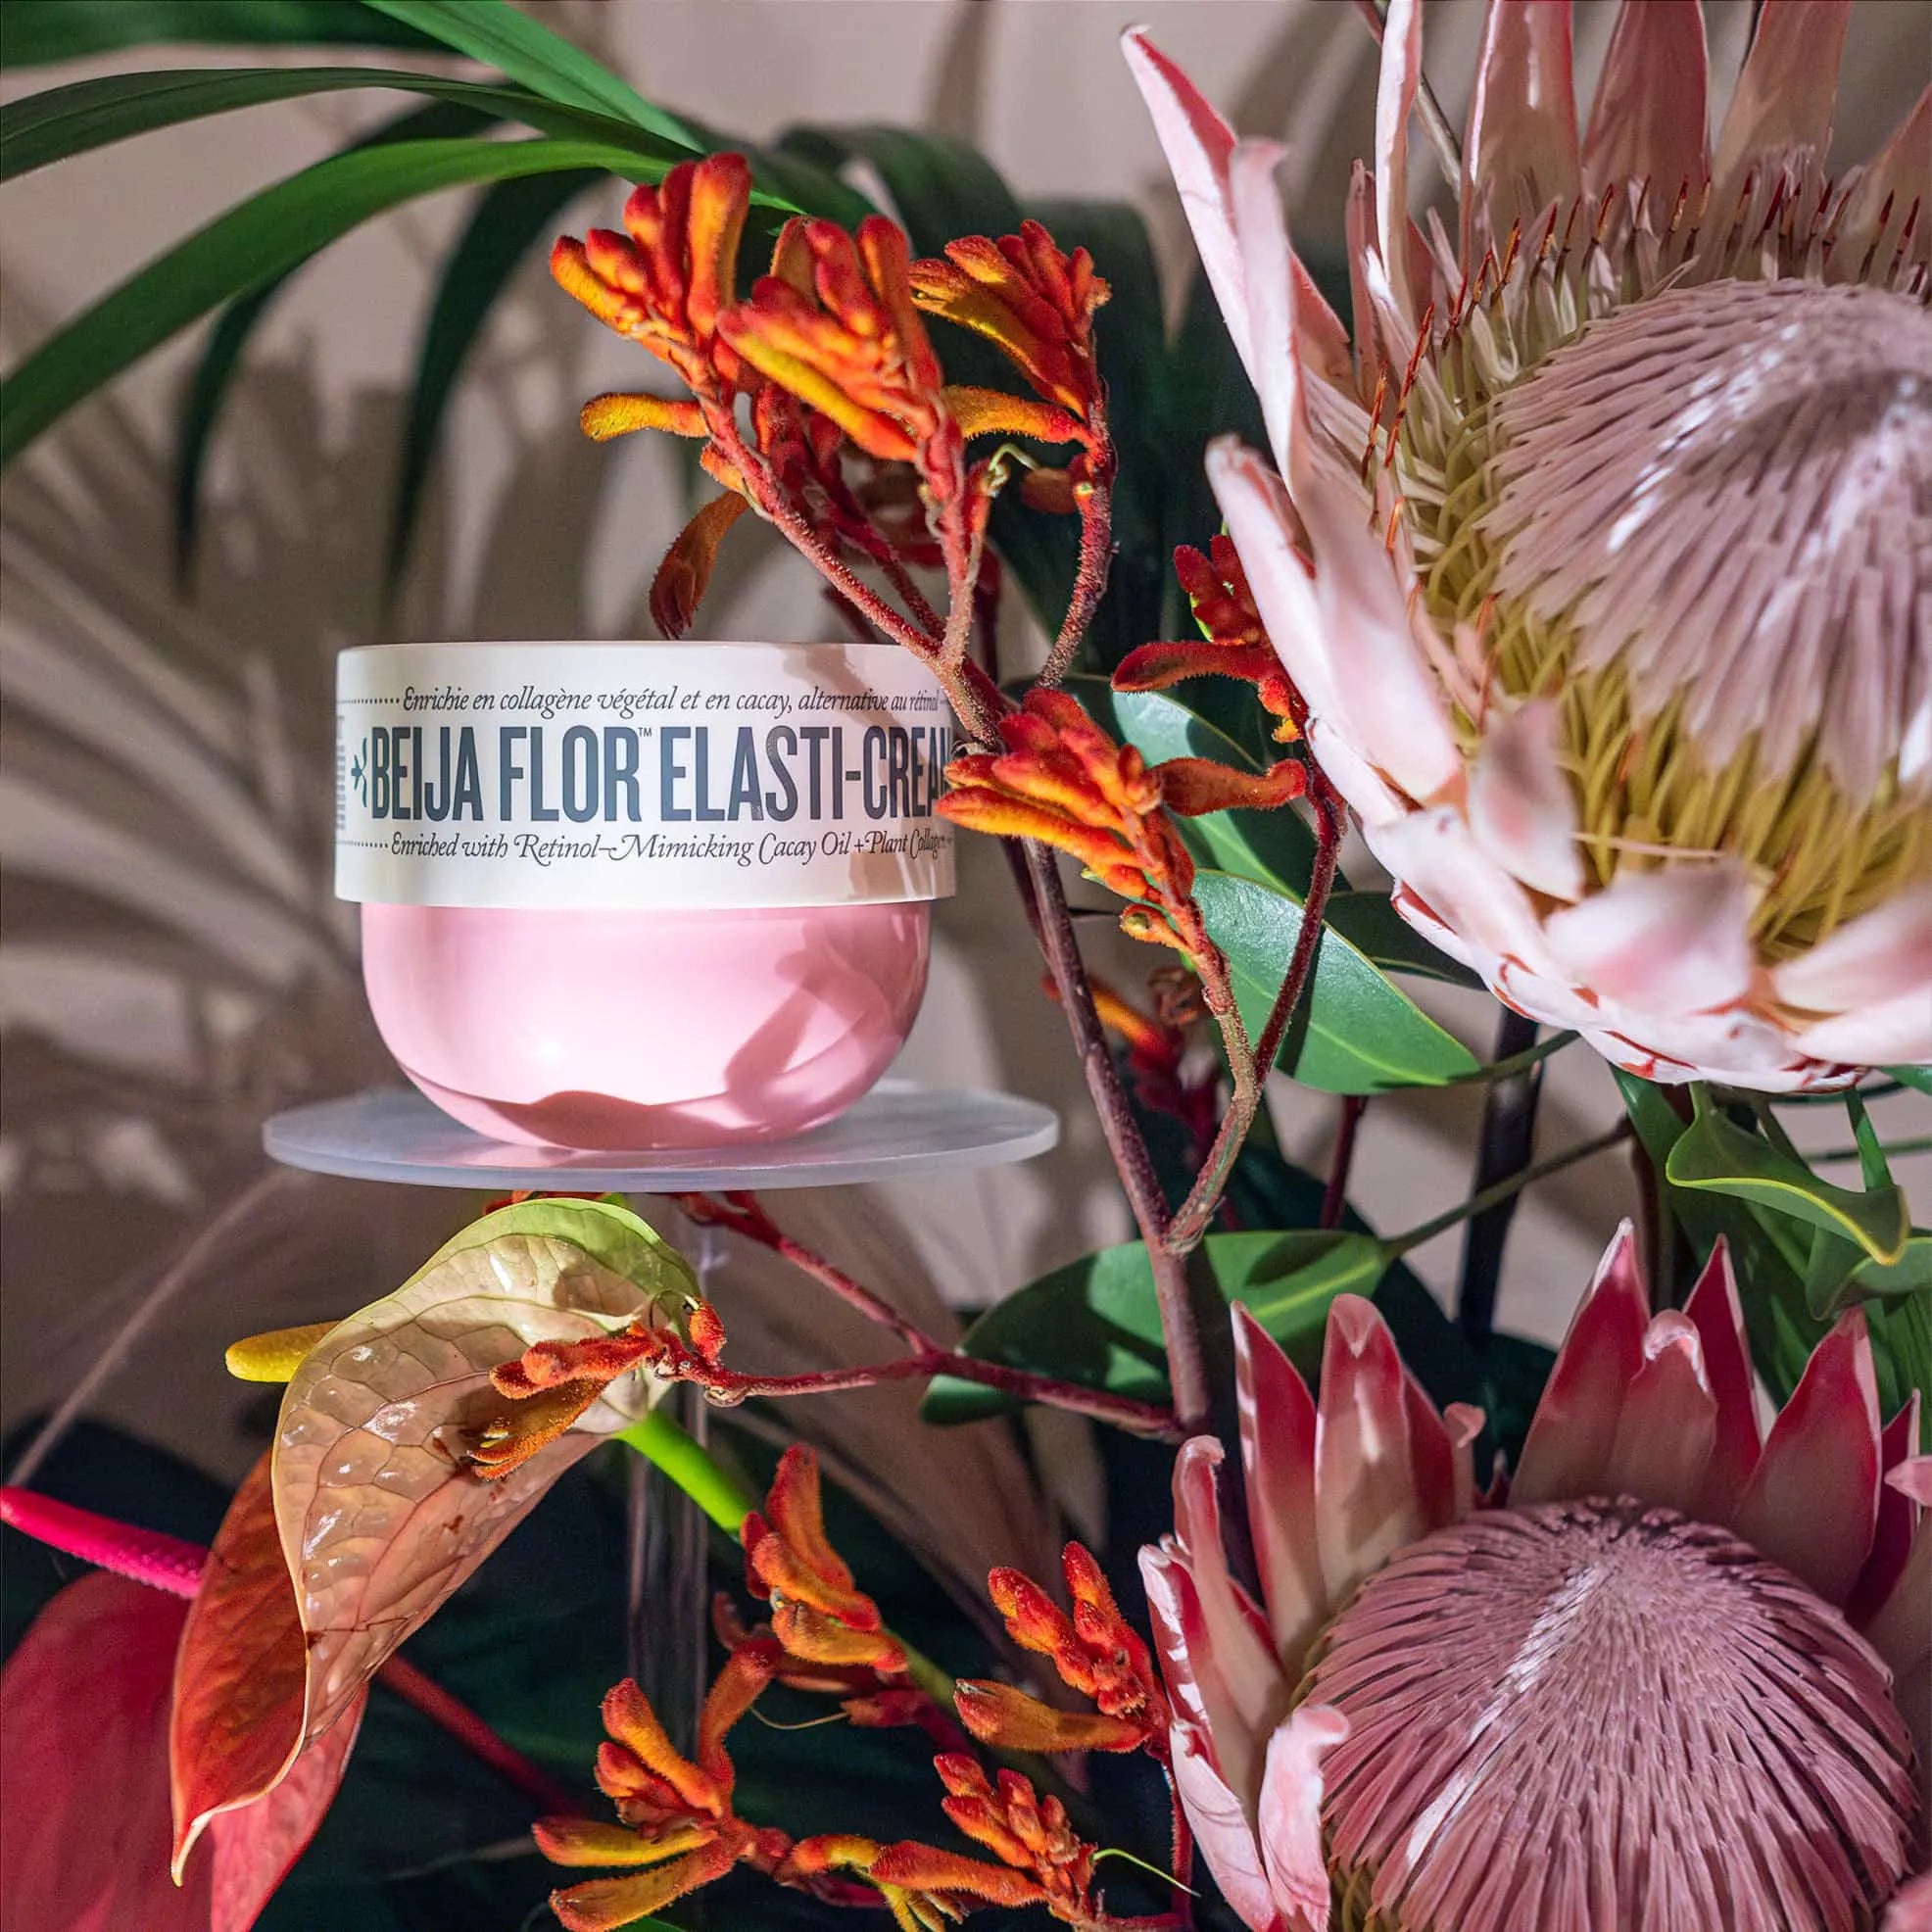 Sol de Janeiro's Beija Flor Elasti-Cream highlighted within Amaranté London's bespoke floral installation, featuring fiery red kangaroo paws and soft pink proteas against a serene backdrop.